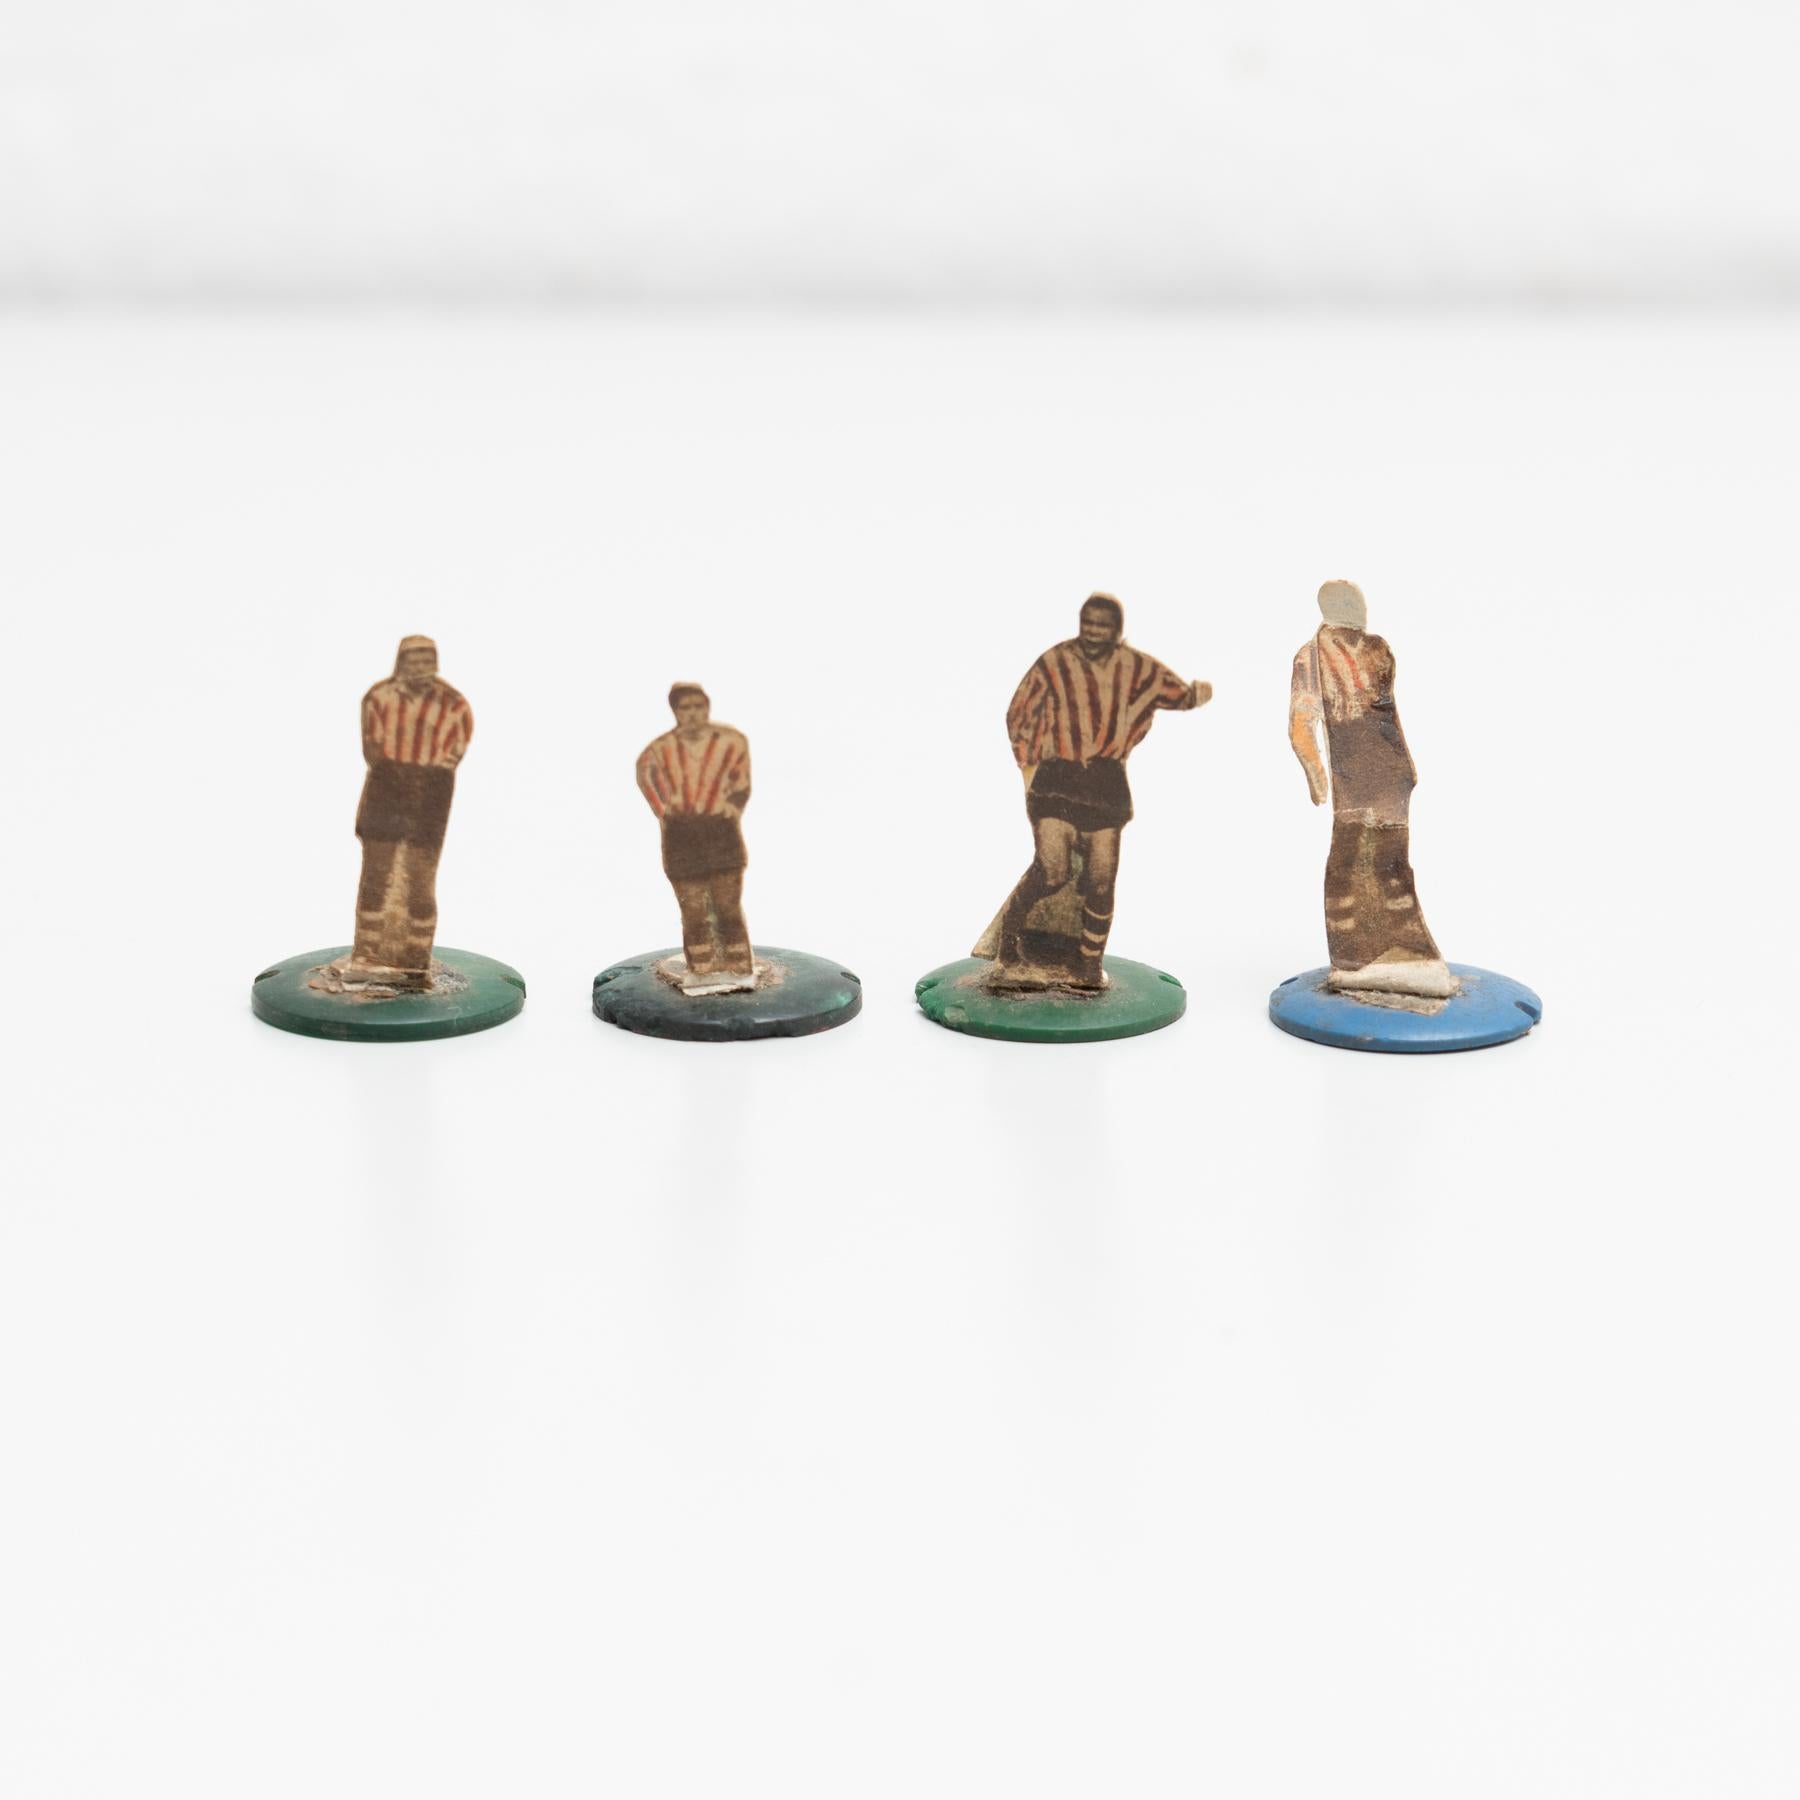 Mid-Century Modern Set of 4 Traditional Antique Button Soccer Game Figures, circa 1950 For Sale